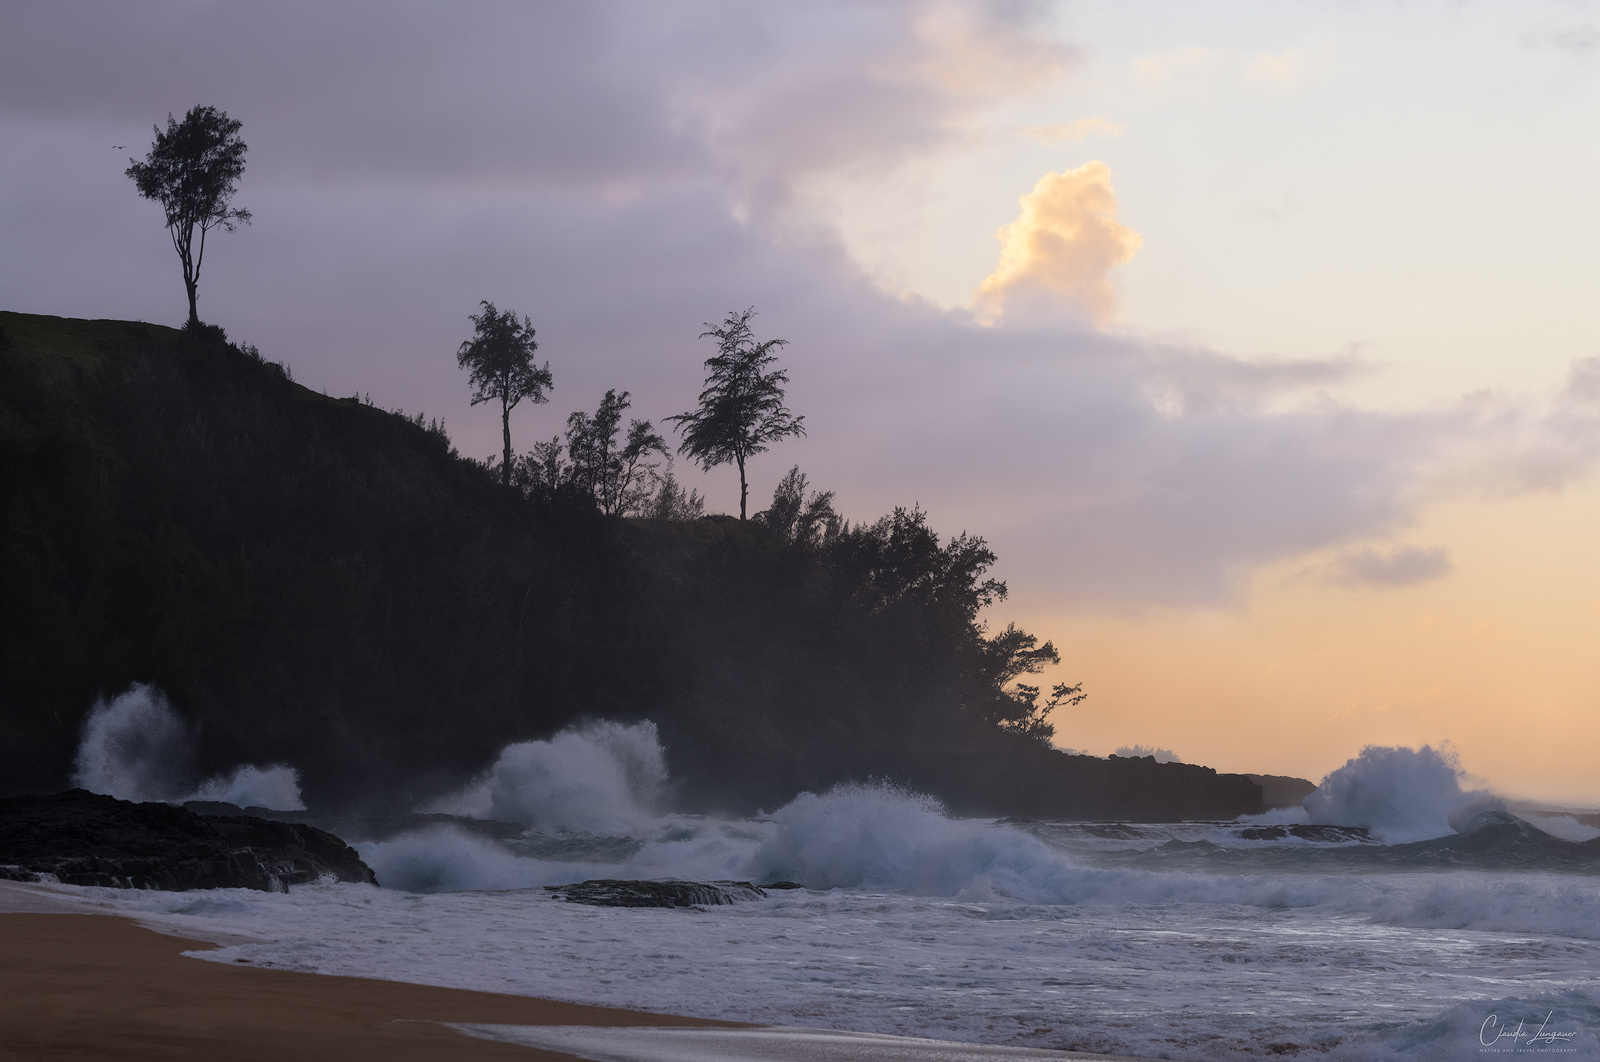 Dramatic clouds and waves at Secret Beach on Kauai's north shore in Hawaii.